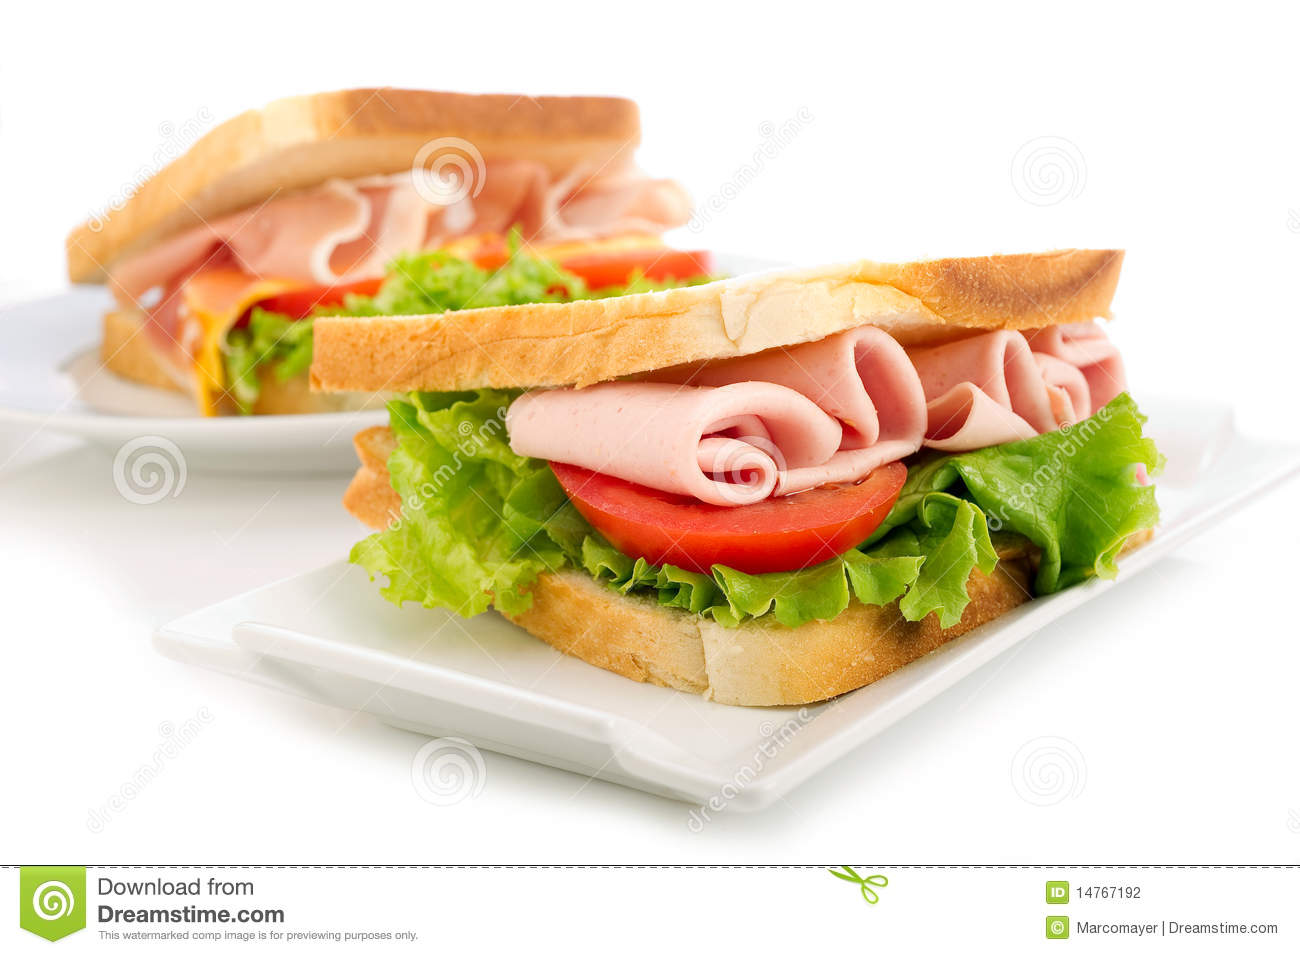 Turkey Sandwich With Salad And Tomato On White Background 